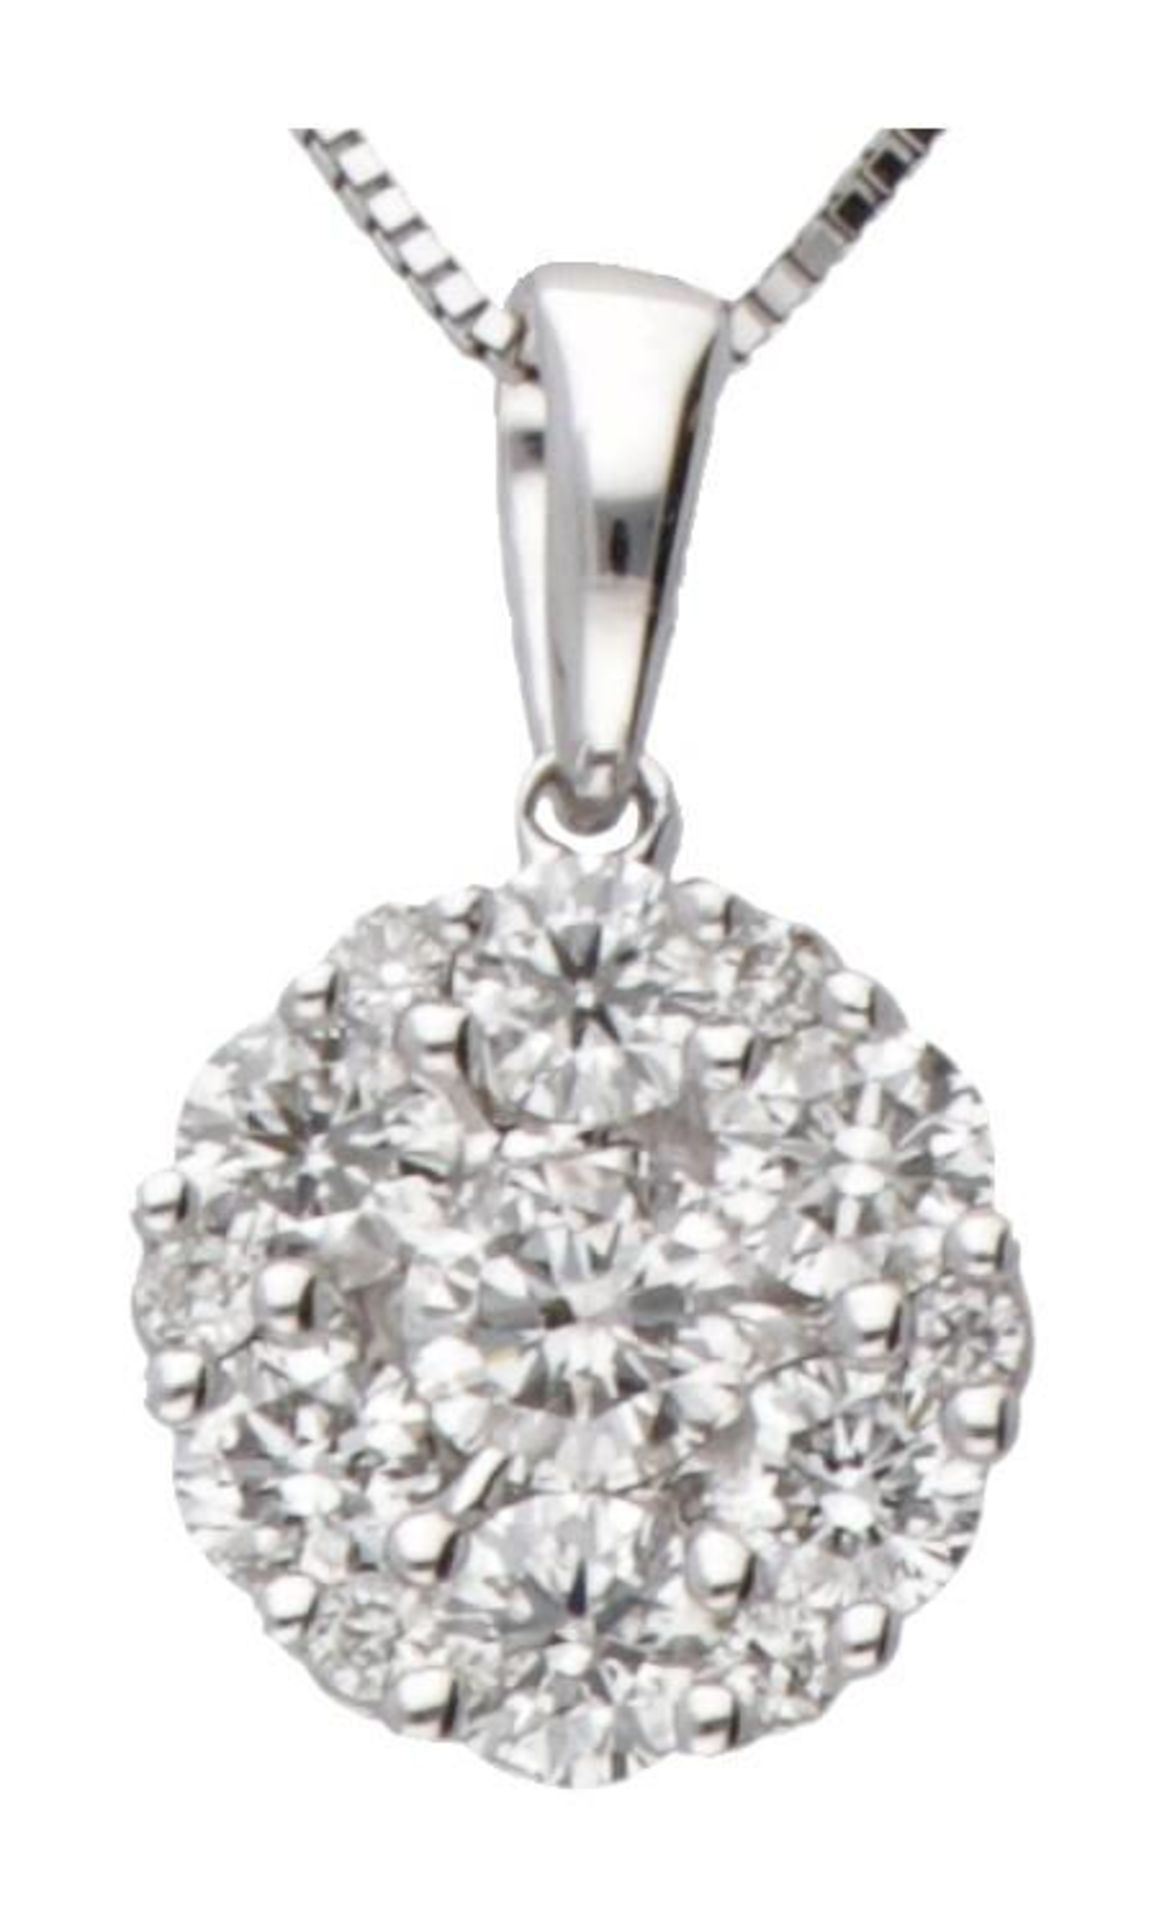 14K. White gold necklace with cluster pendant set with approx. 0.50 ct. diamond. - Image 3 of 6